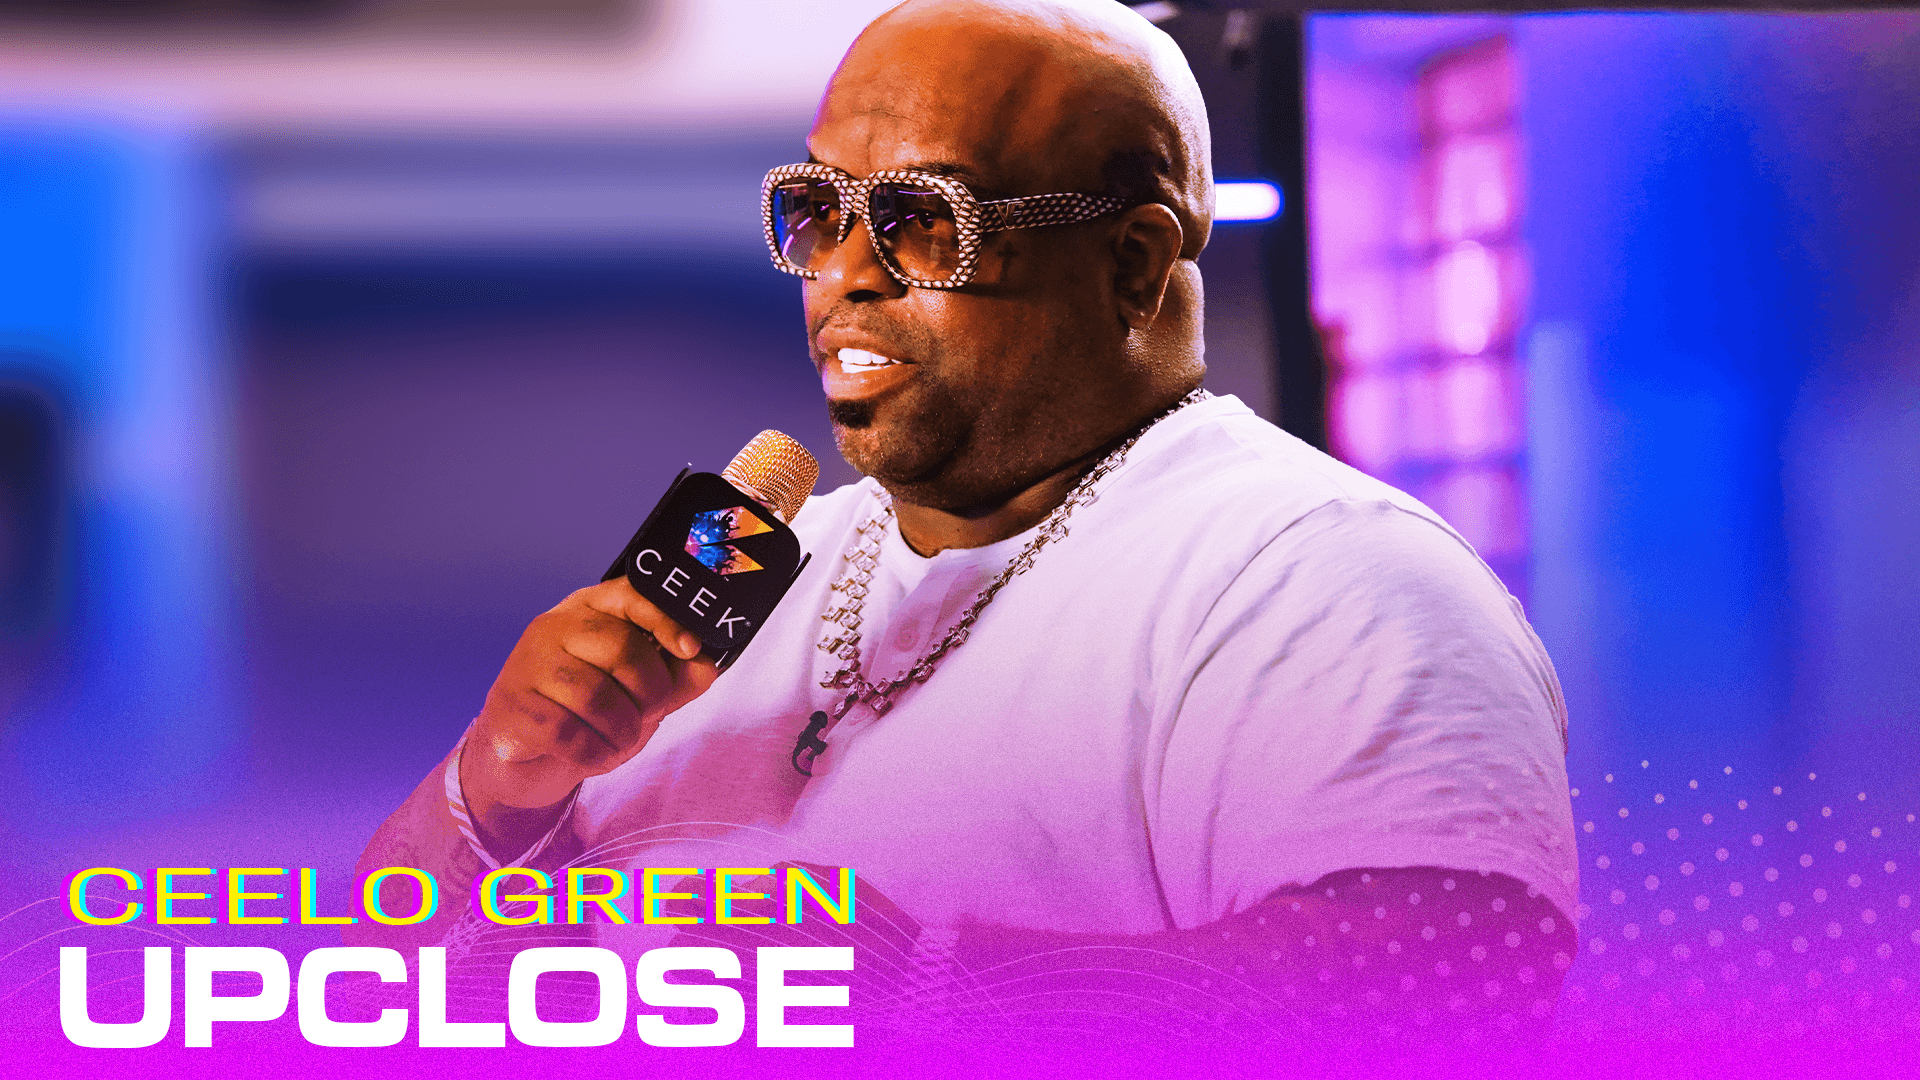 Upclose with CeeLo Green